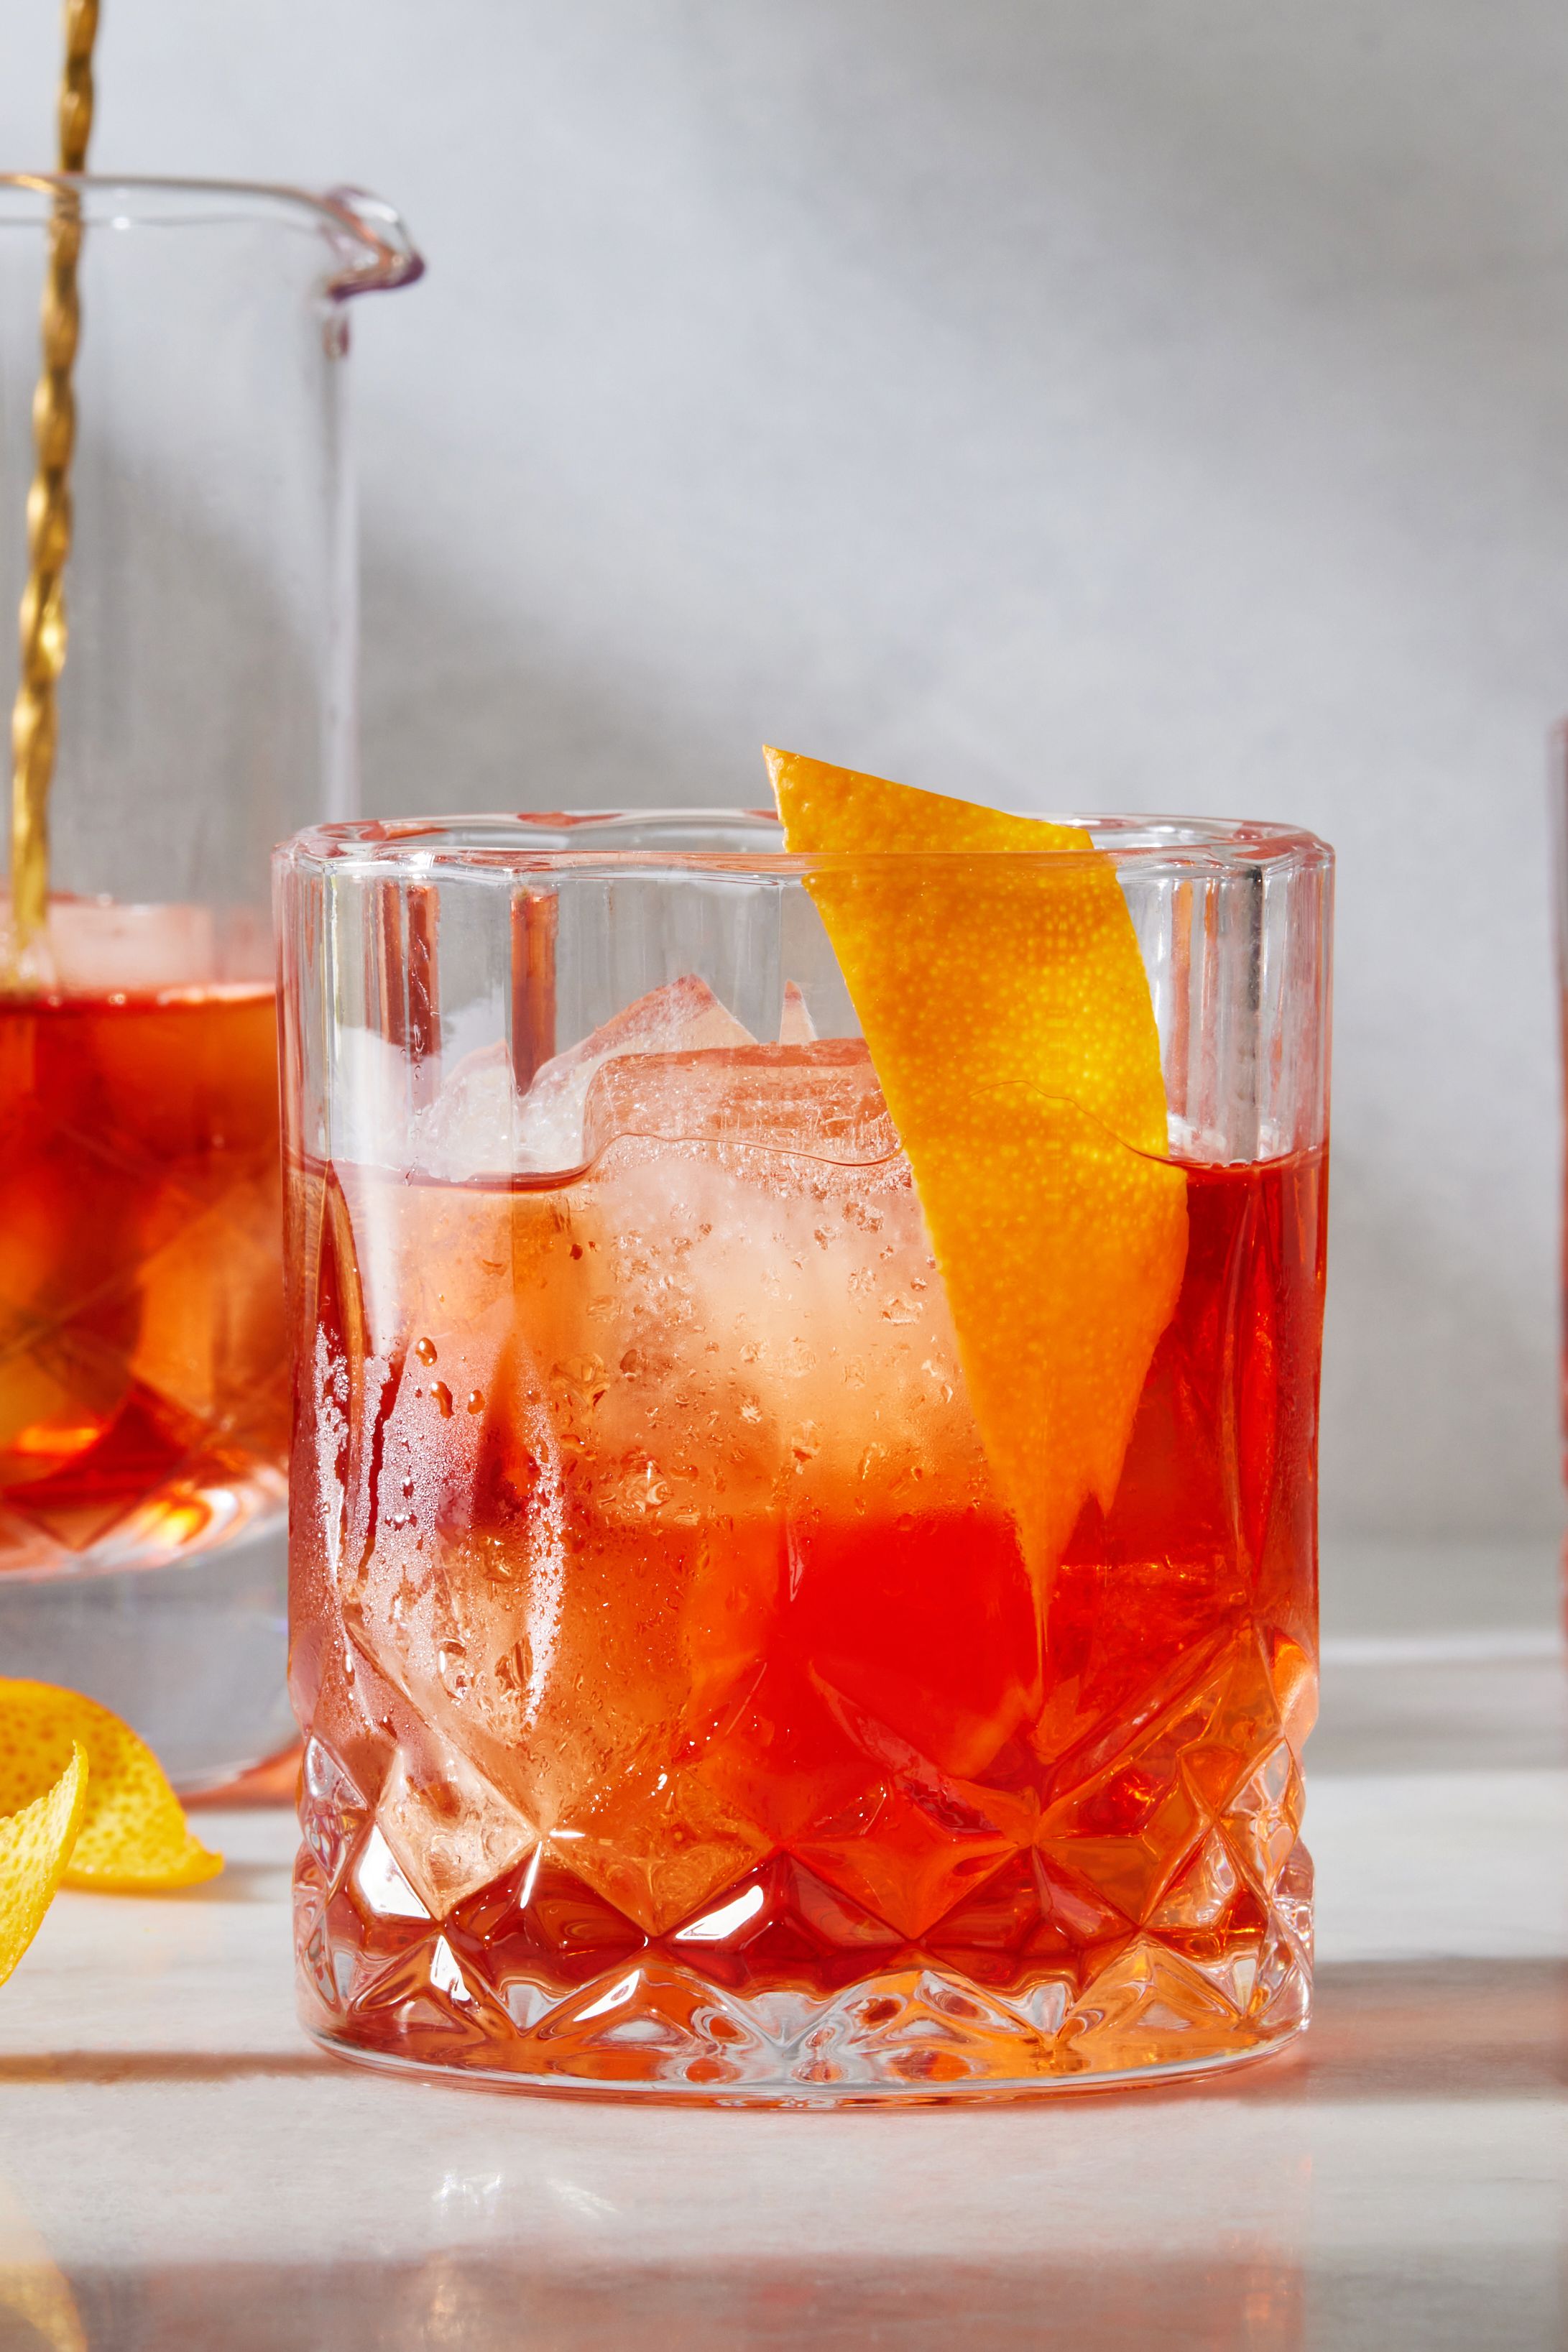 10 Easy Bitter Cocktail Recipes - Alcohol-Forward Cocktail Ideas